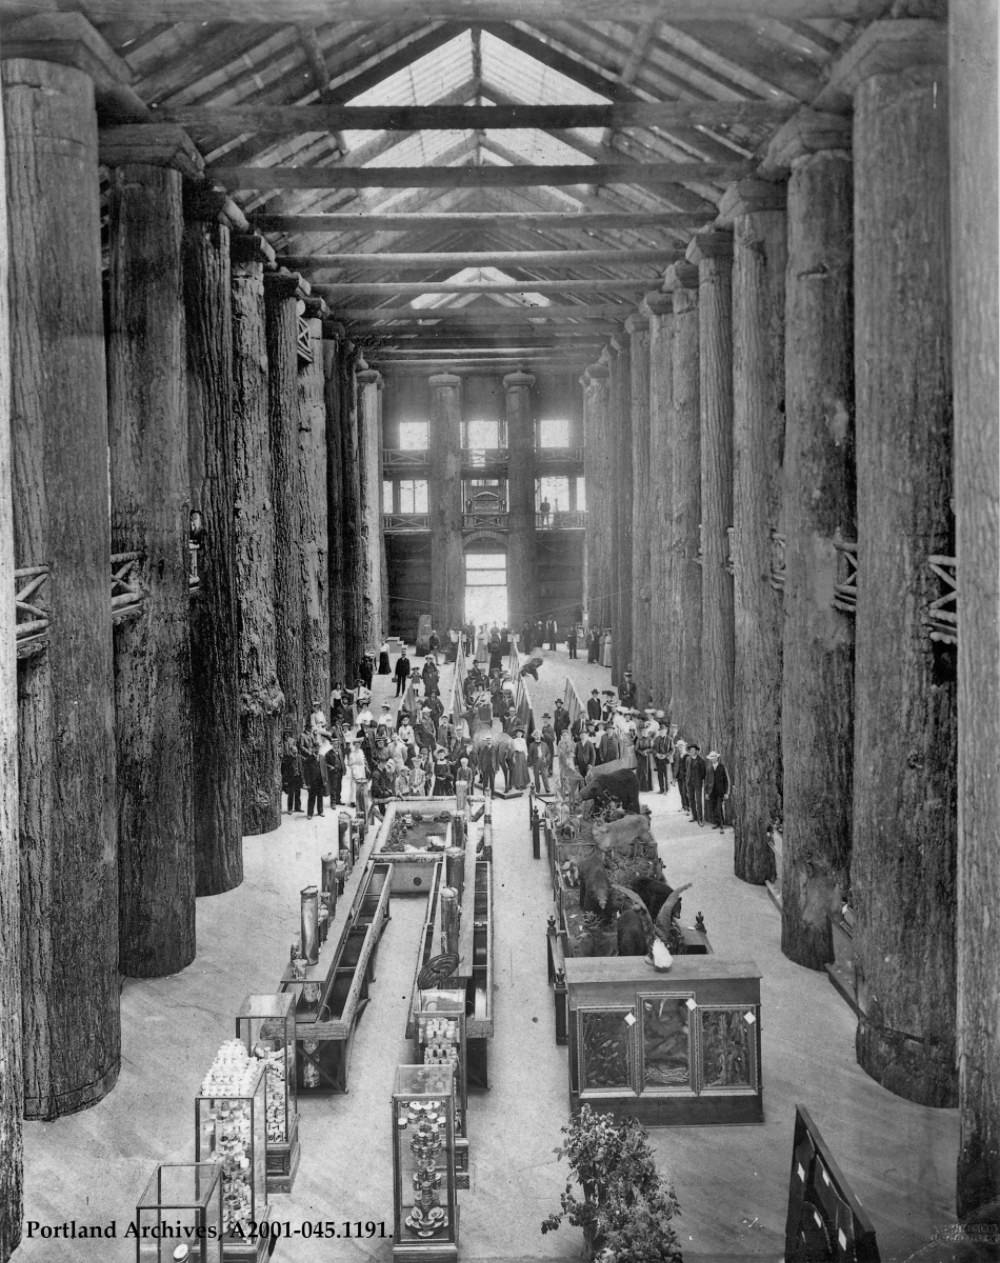 The interior of the Forestry Building at the Lewis and Clark Centennial Exposition, Portland, 1905.